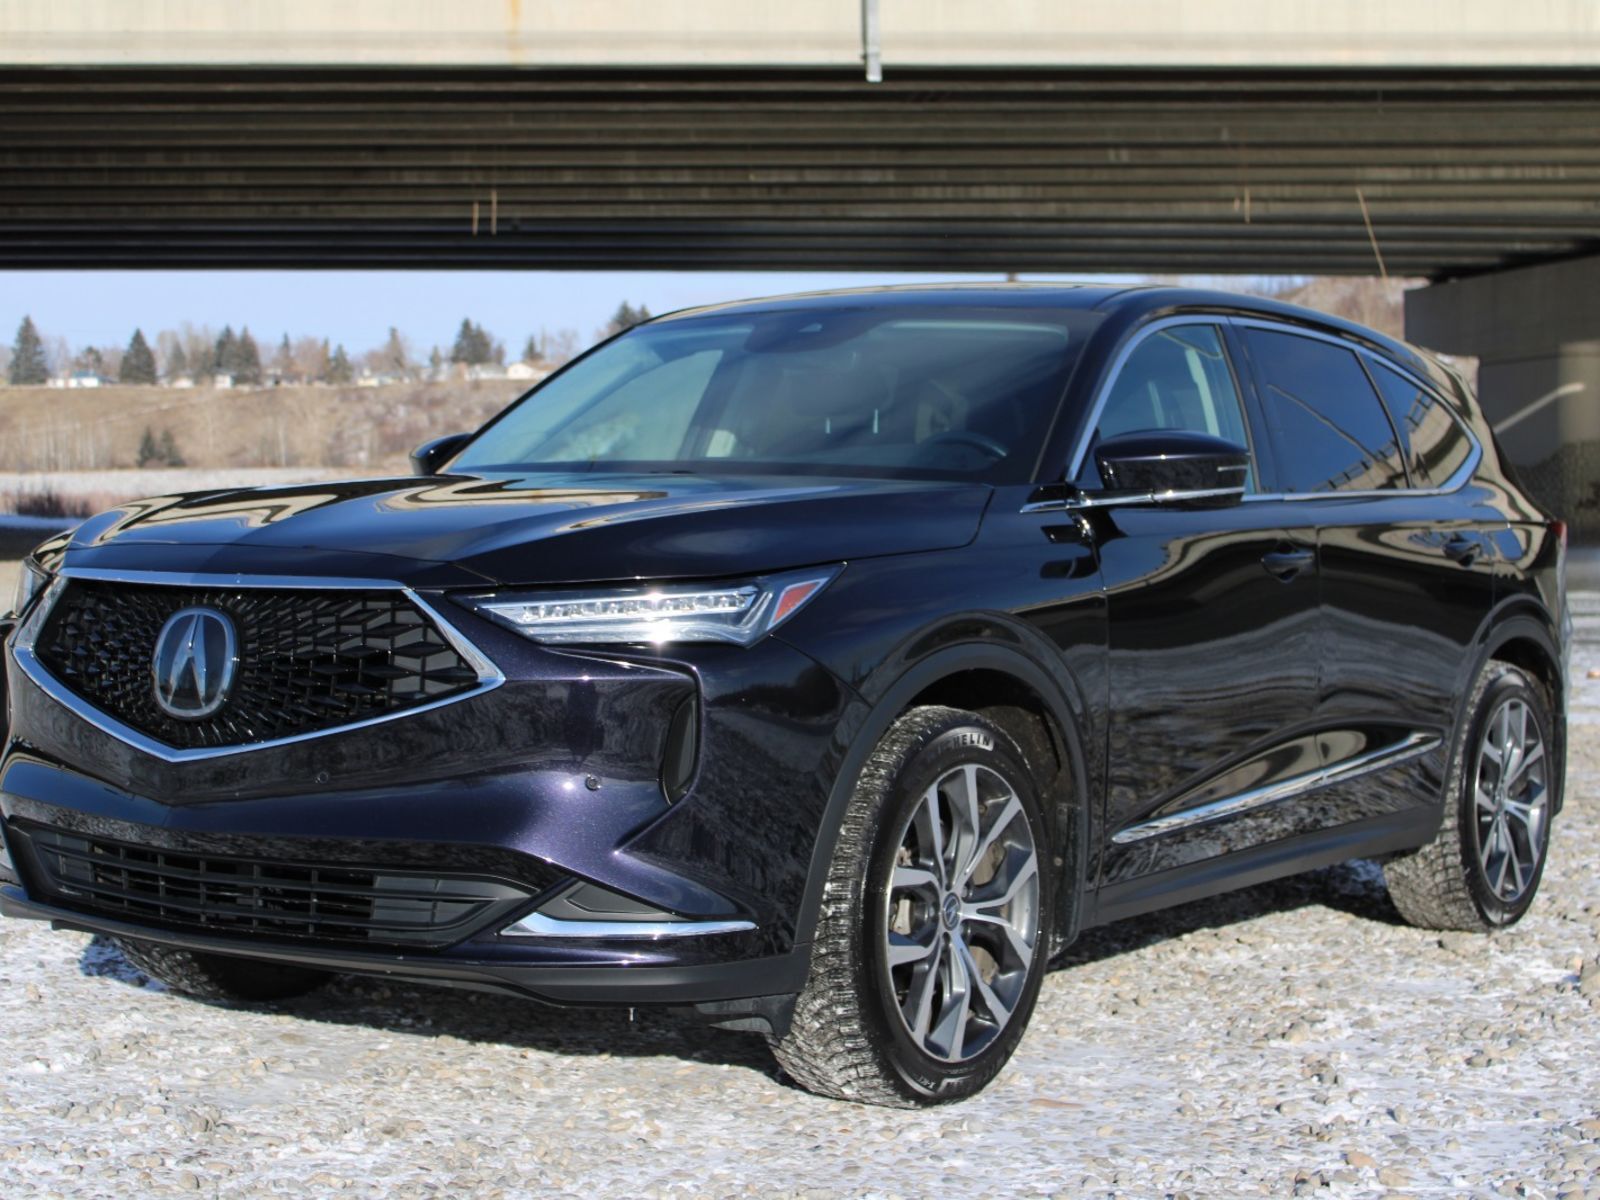 2022 Acura MDX TECH PACKAGE - NO ACCIDENTS, UP TO DATE SERVICE!